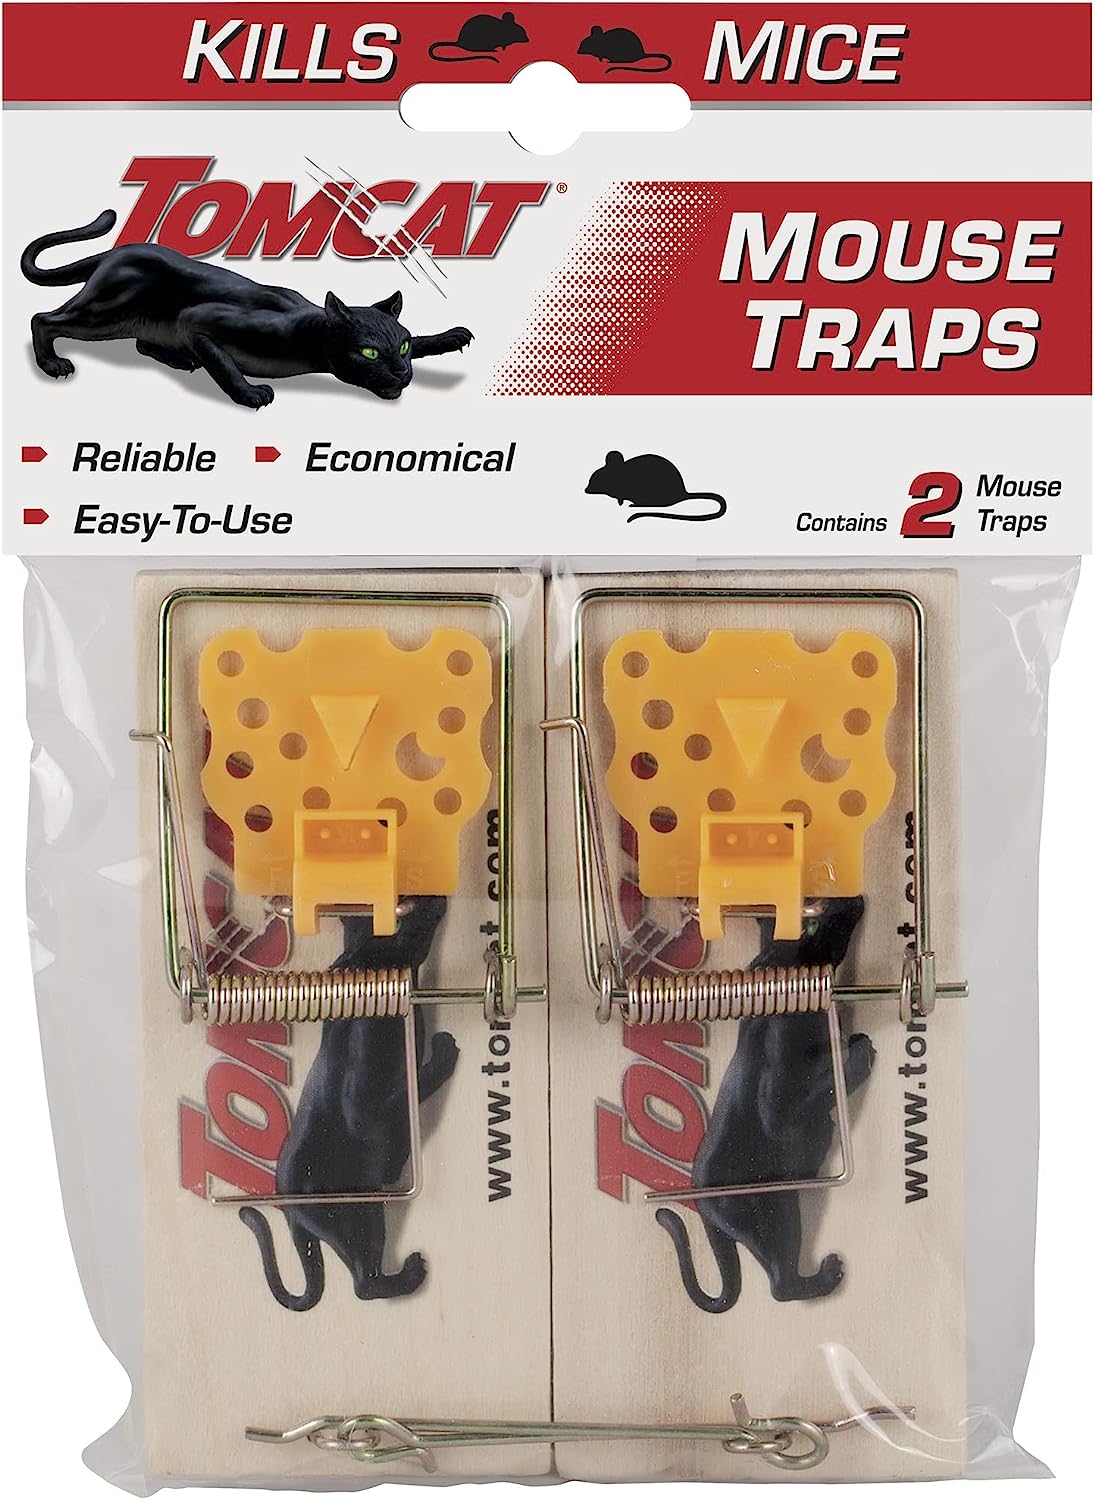 10 Wooden Mouse Traps | Quick Kill | Inexpensive & Effective